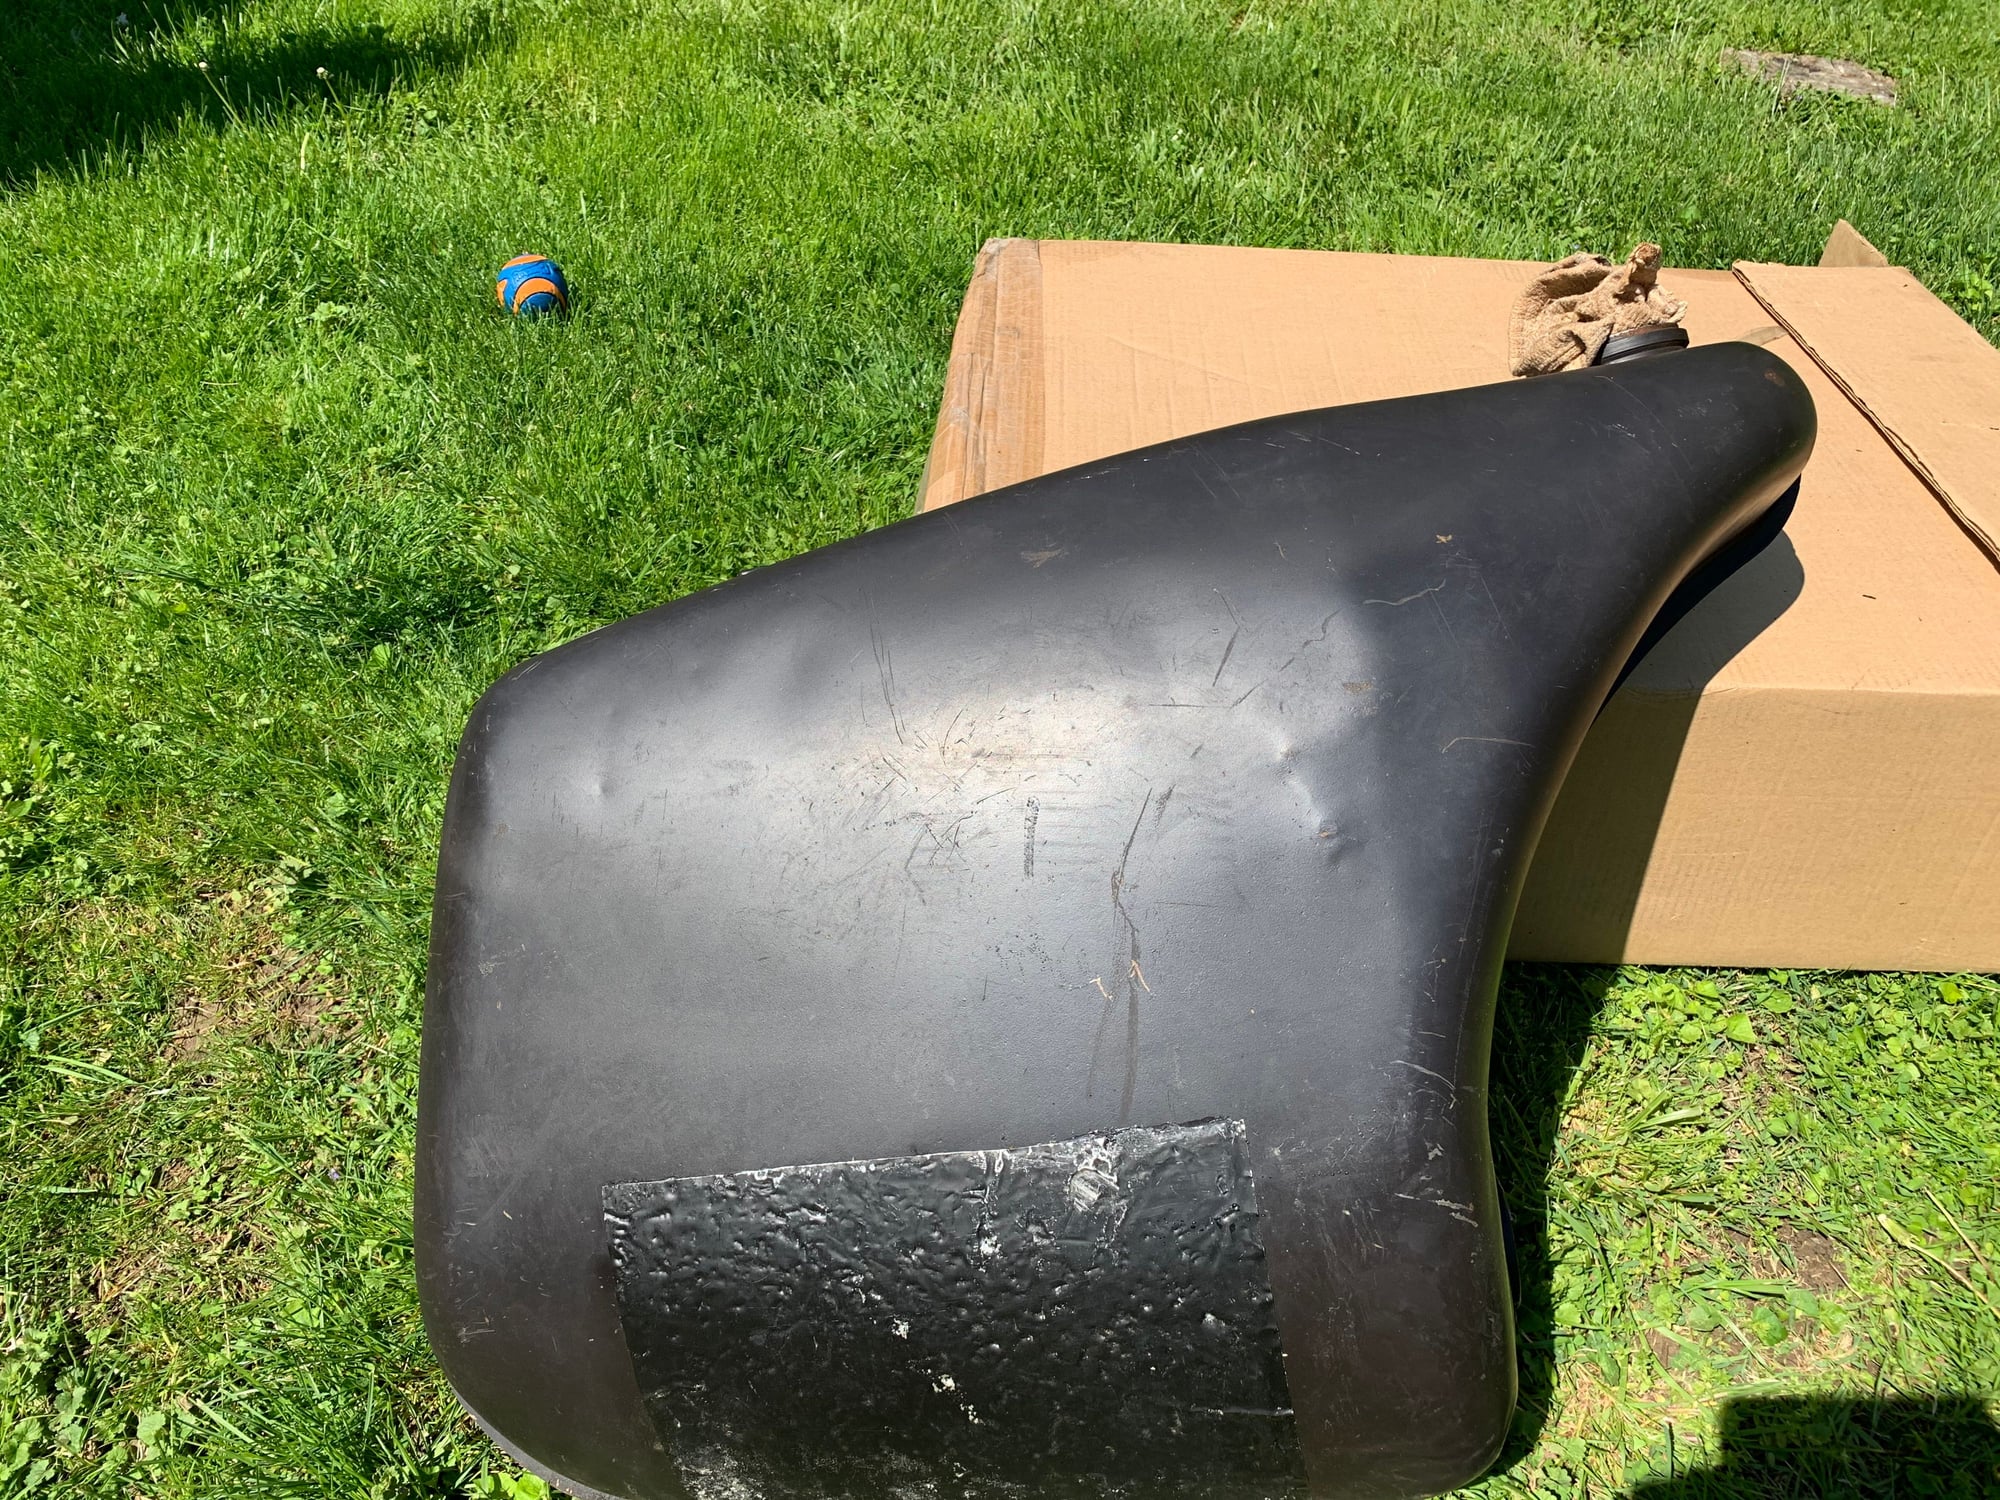 Engine - Intake/Fuel - Series 1 RH gas tank - Used - 1968 to 1973 Jaguar XJ6 - Indianapolis, IN 46228, United States